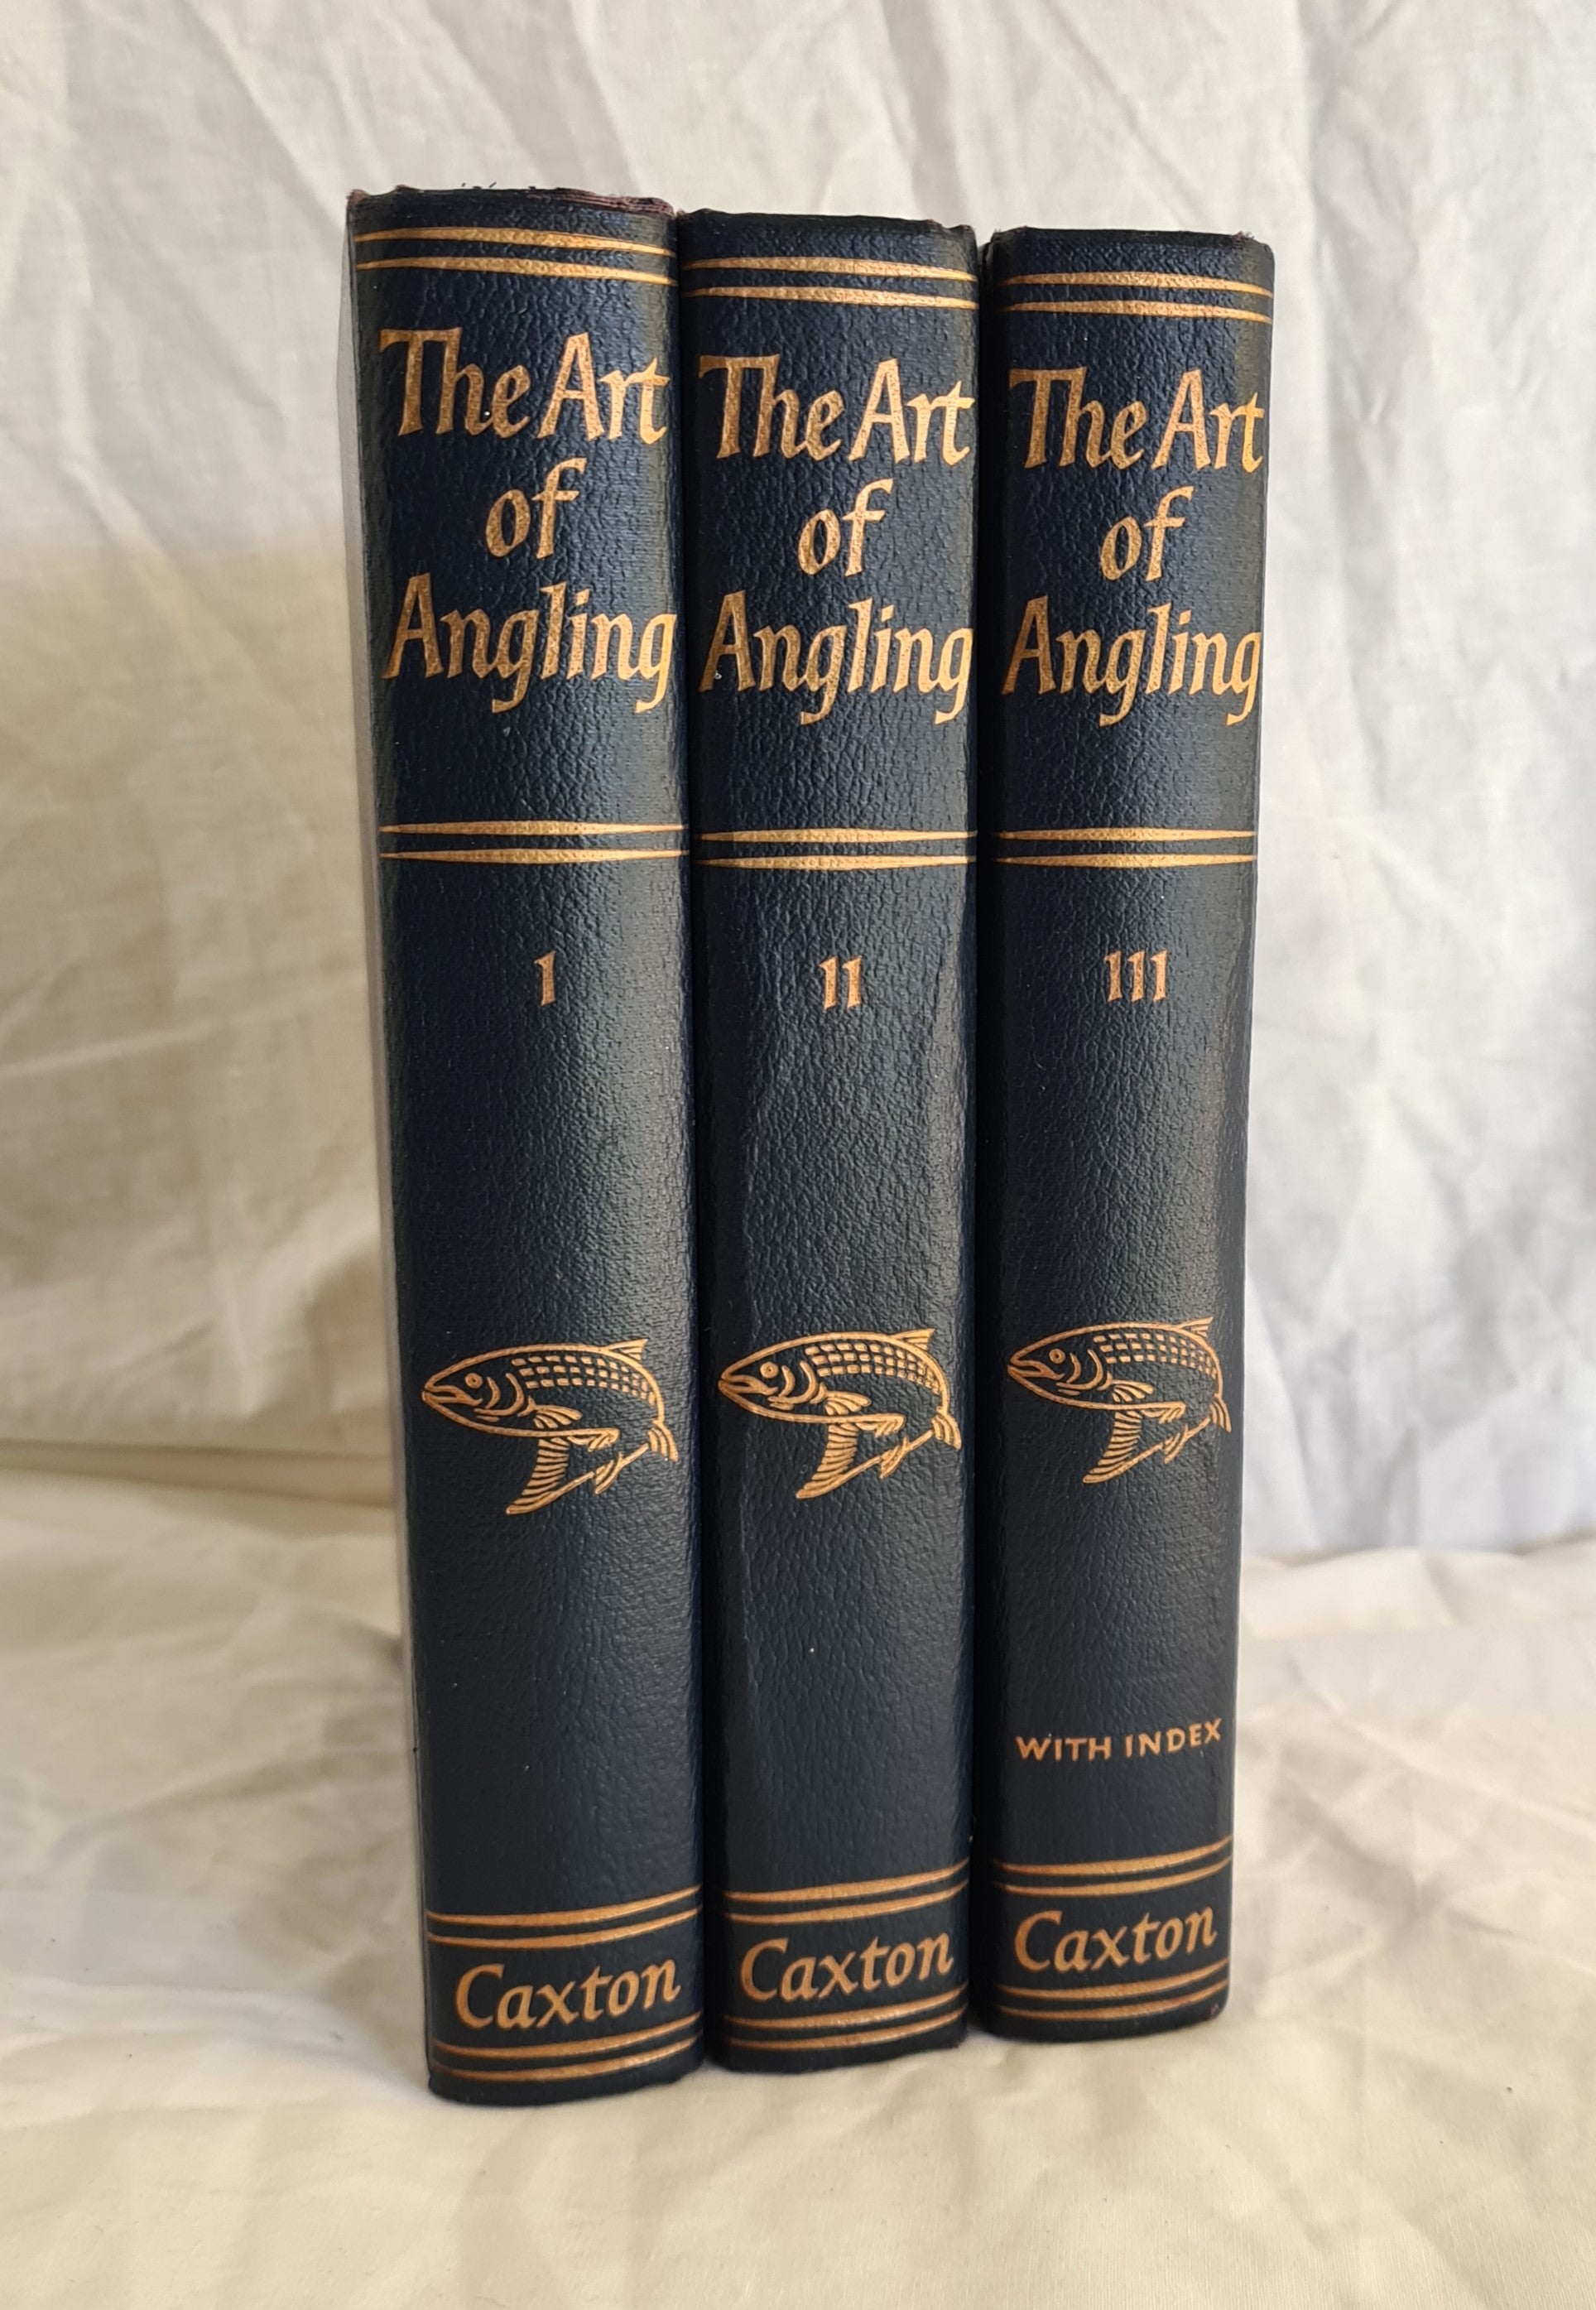 The Art of Angling by Kenneth Mansfield (Three Volumes) – Morgan's